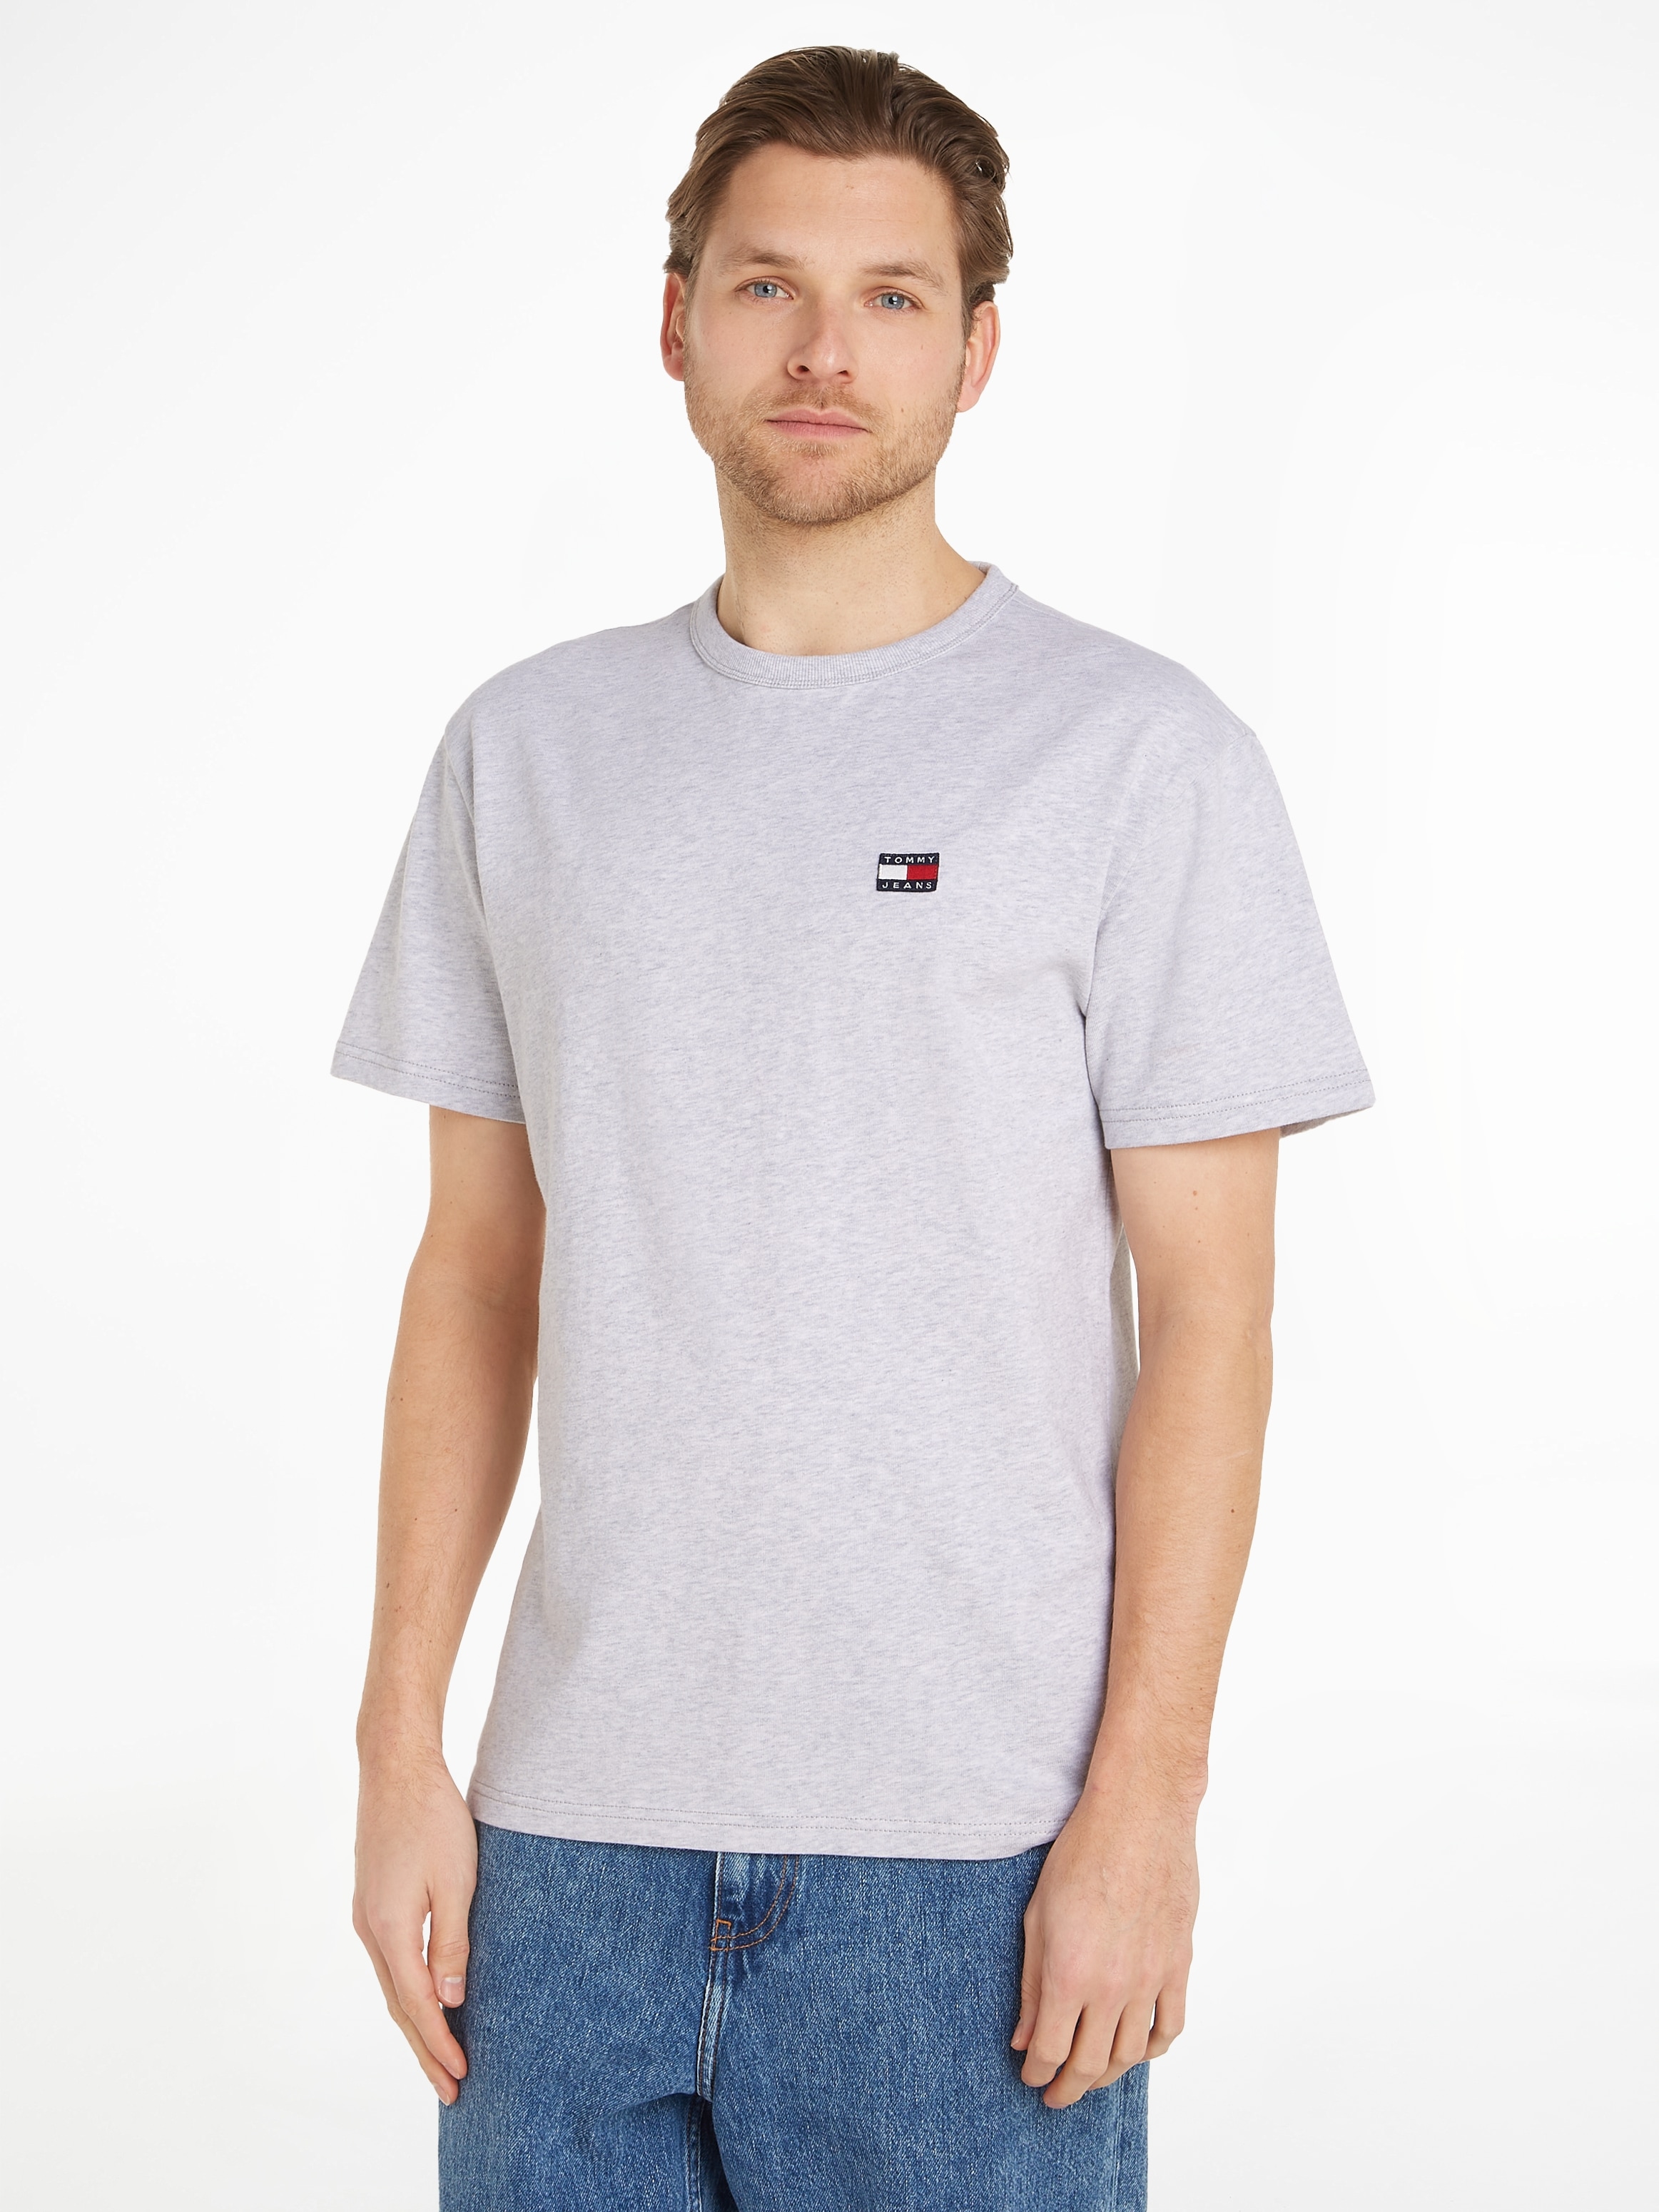 Tommy Jeans T-Shirt OTTO shoppen TEE« »TJM bei XS BADGE TOMMY online CLSC